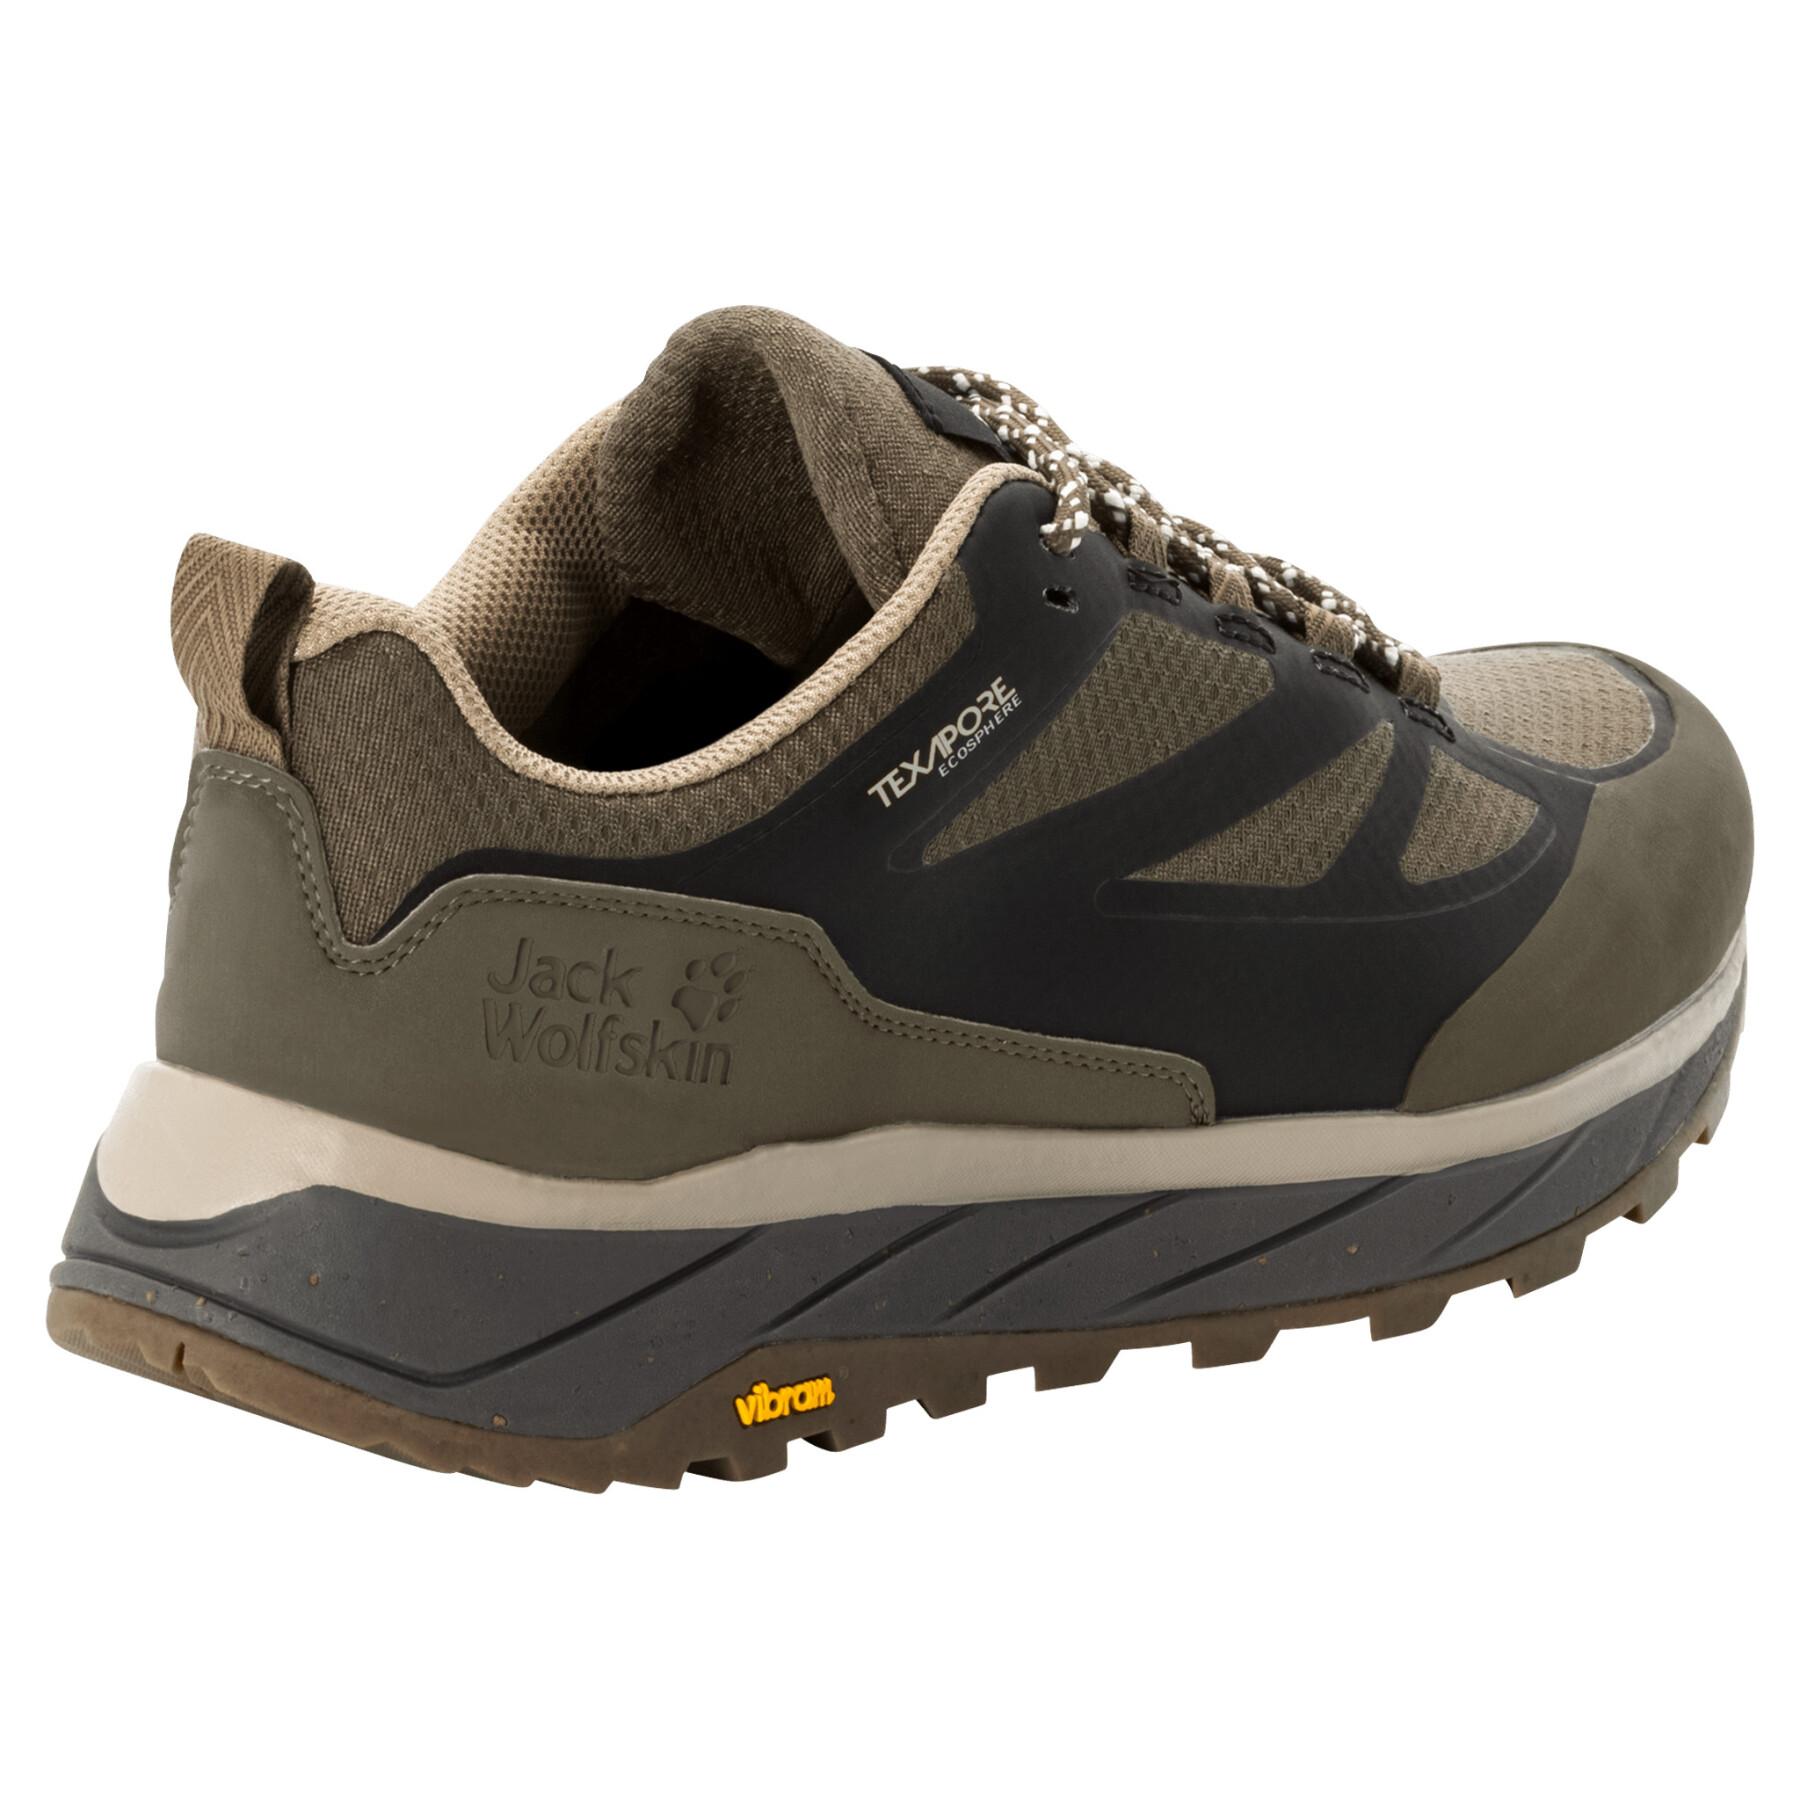 Hiking shoes Jack Wolfskin Terraventure Texapore GT